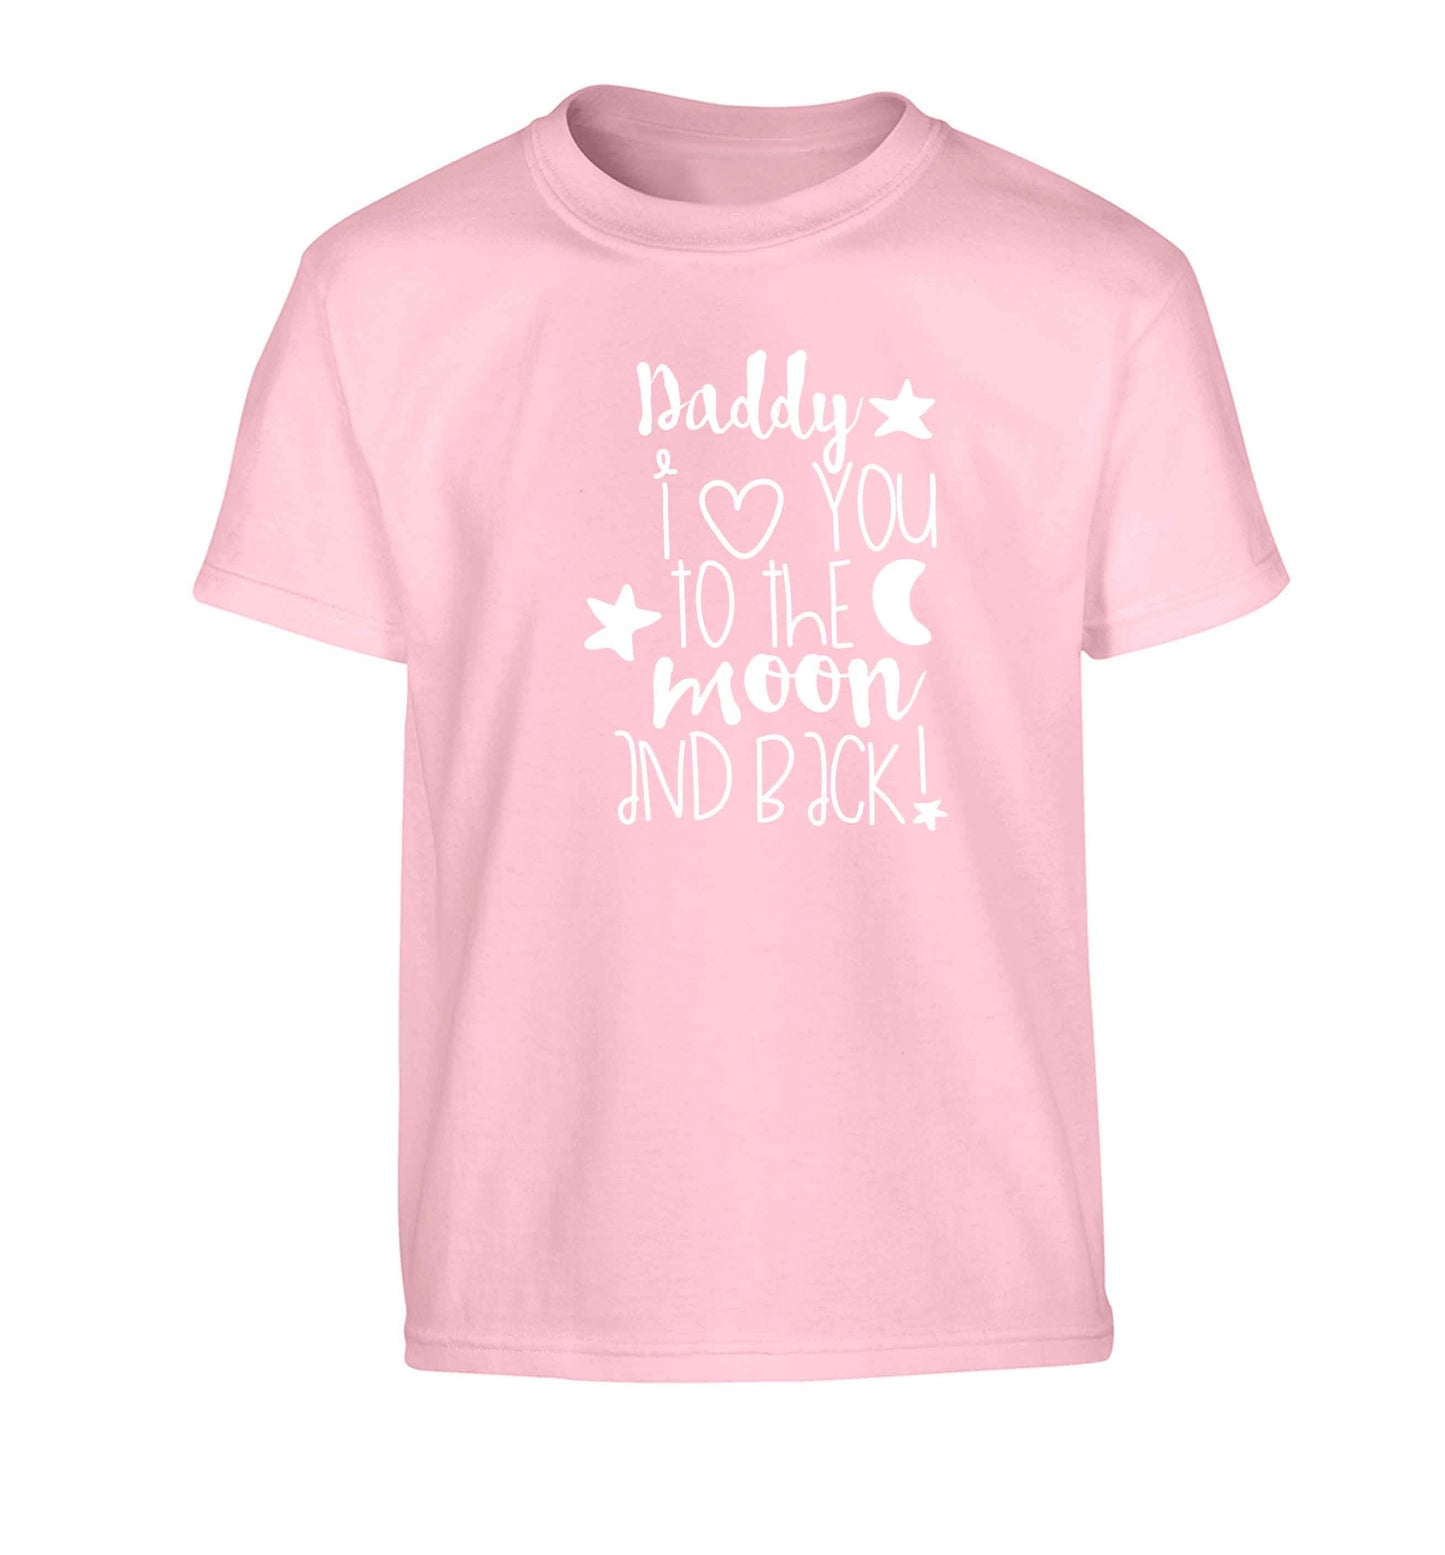 Daddy I love you to the moon and back Children's light pink Tshirt 12-13 Years